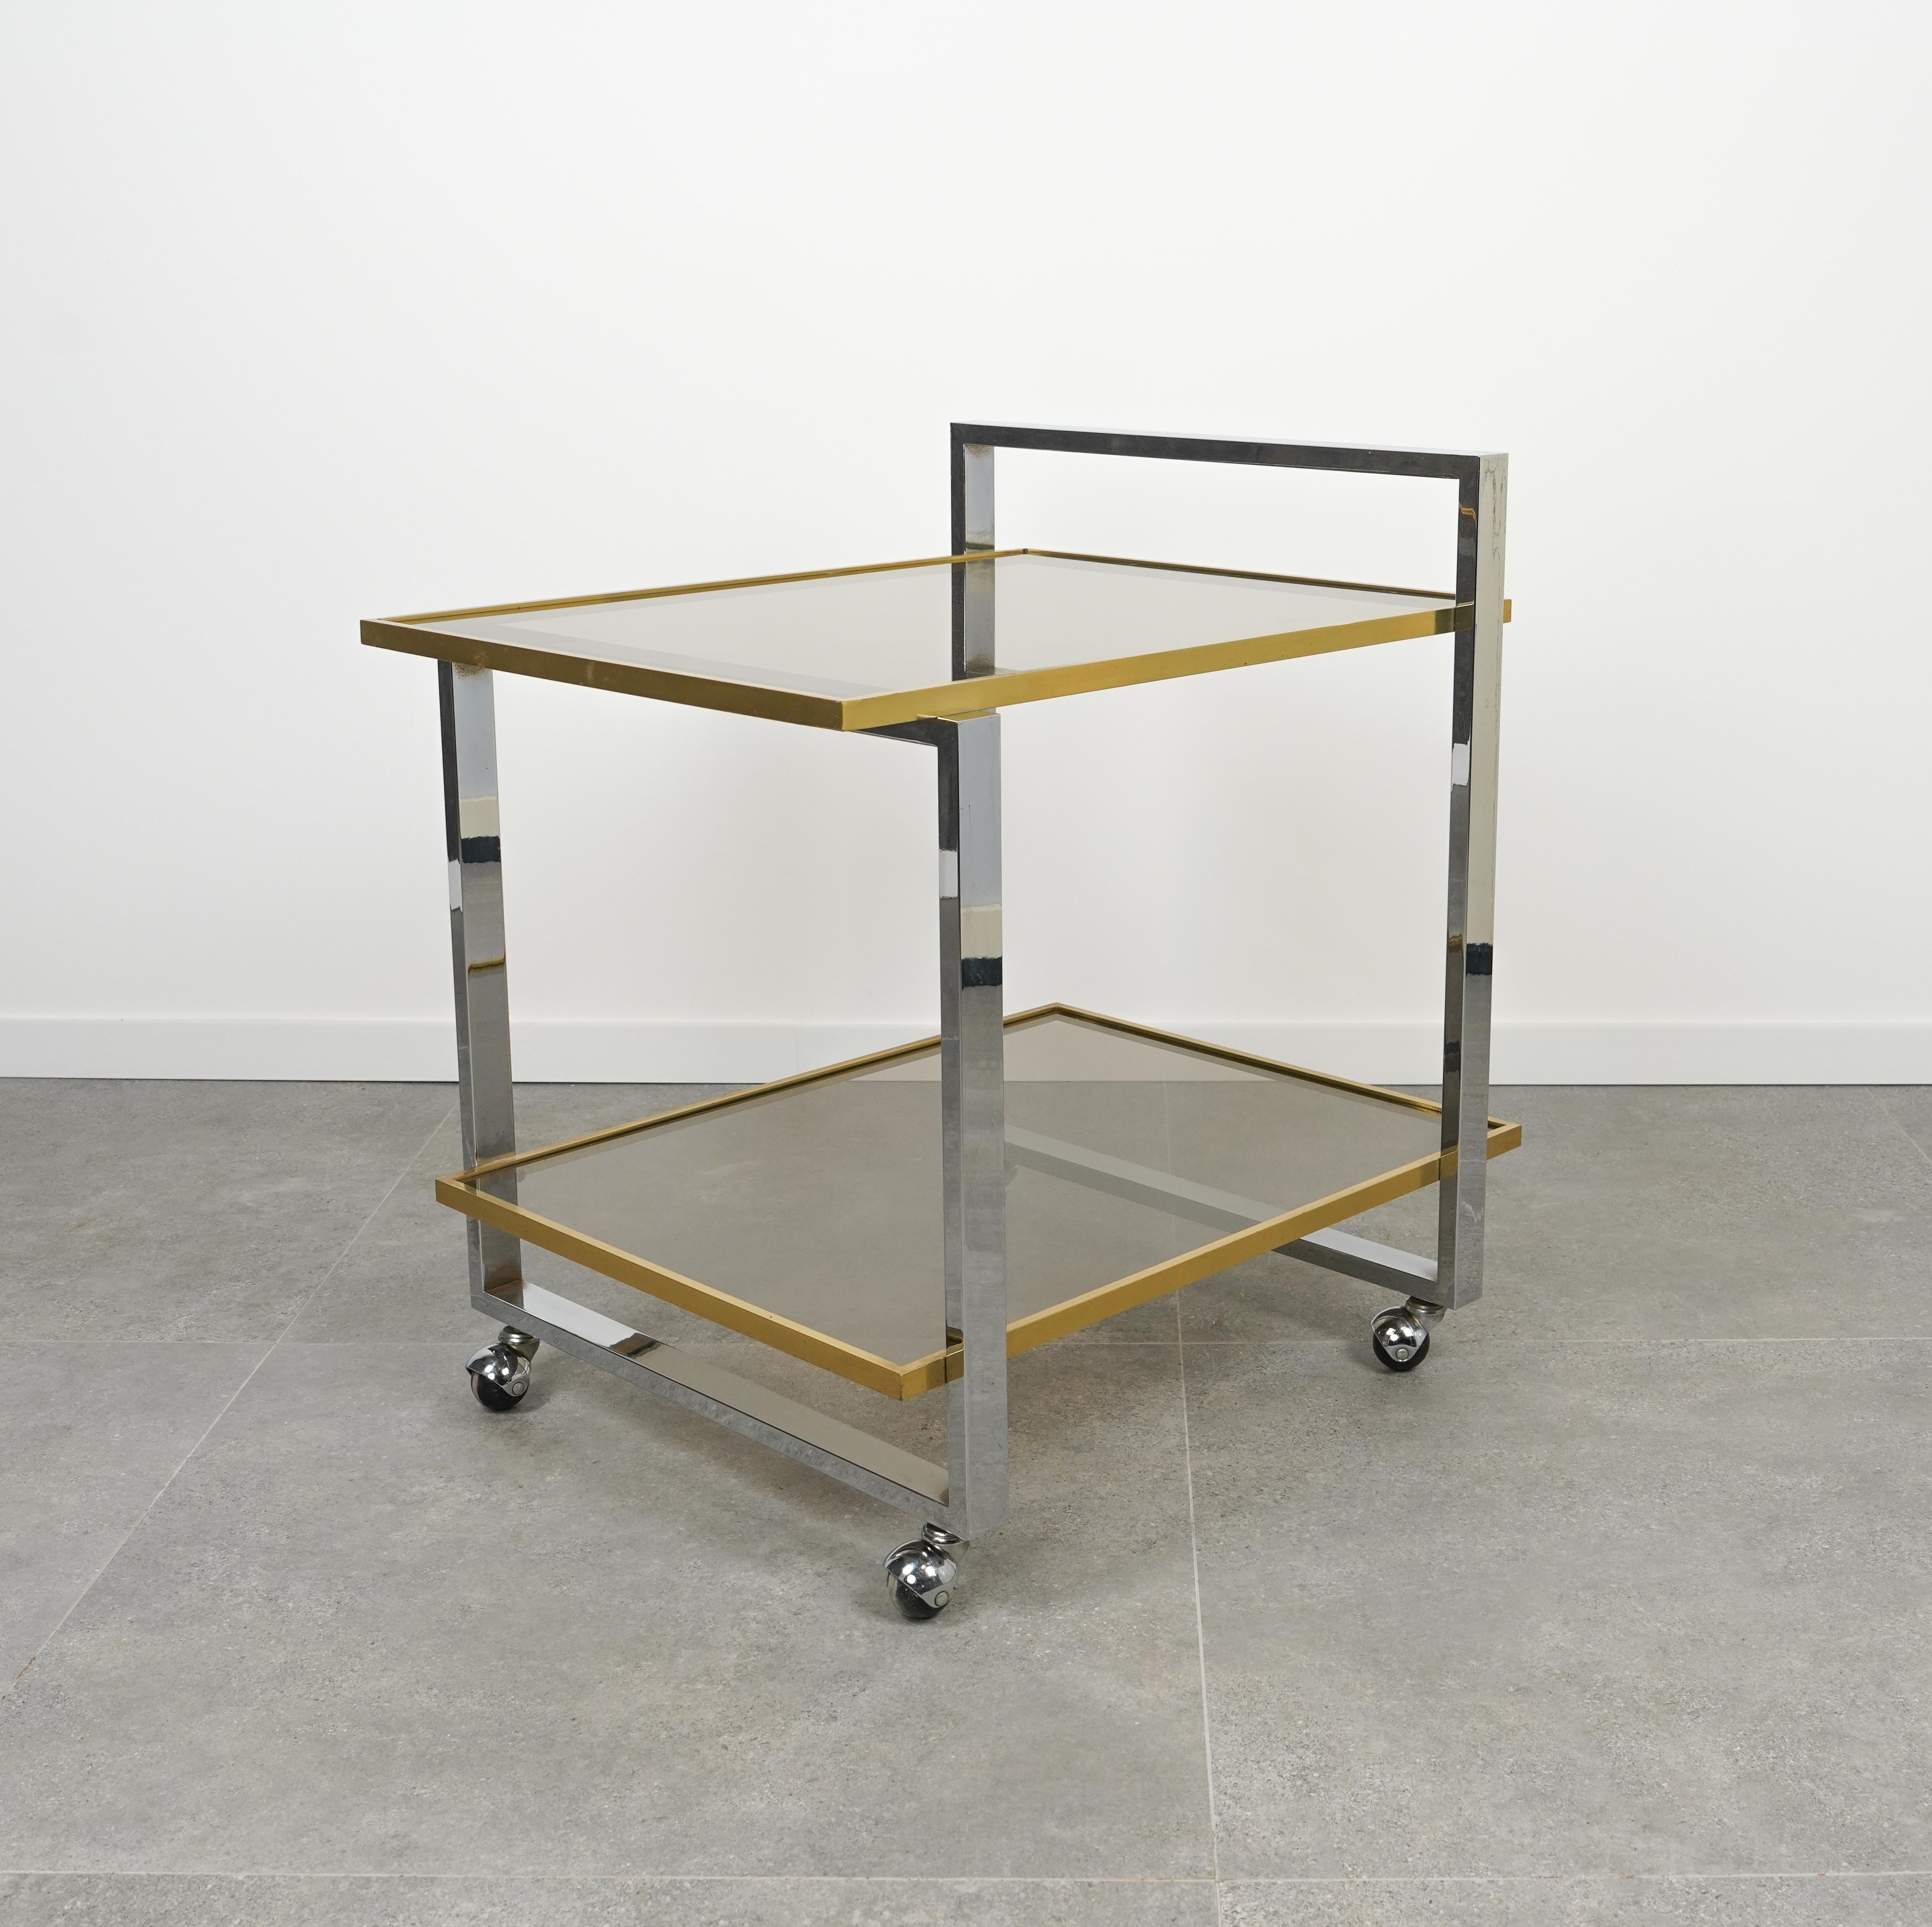 Late 20th Century Midcentury Serving Cart in Chrome, Brass and Glass by Romeo Rega, Italy 1970s For Sale